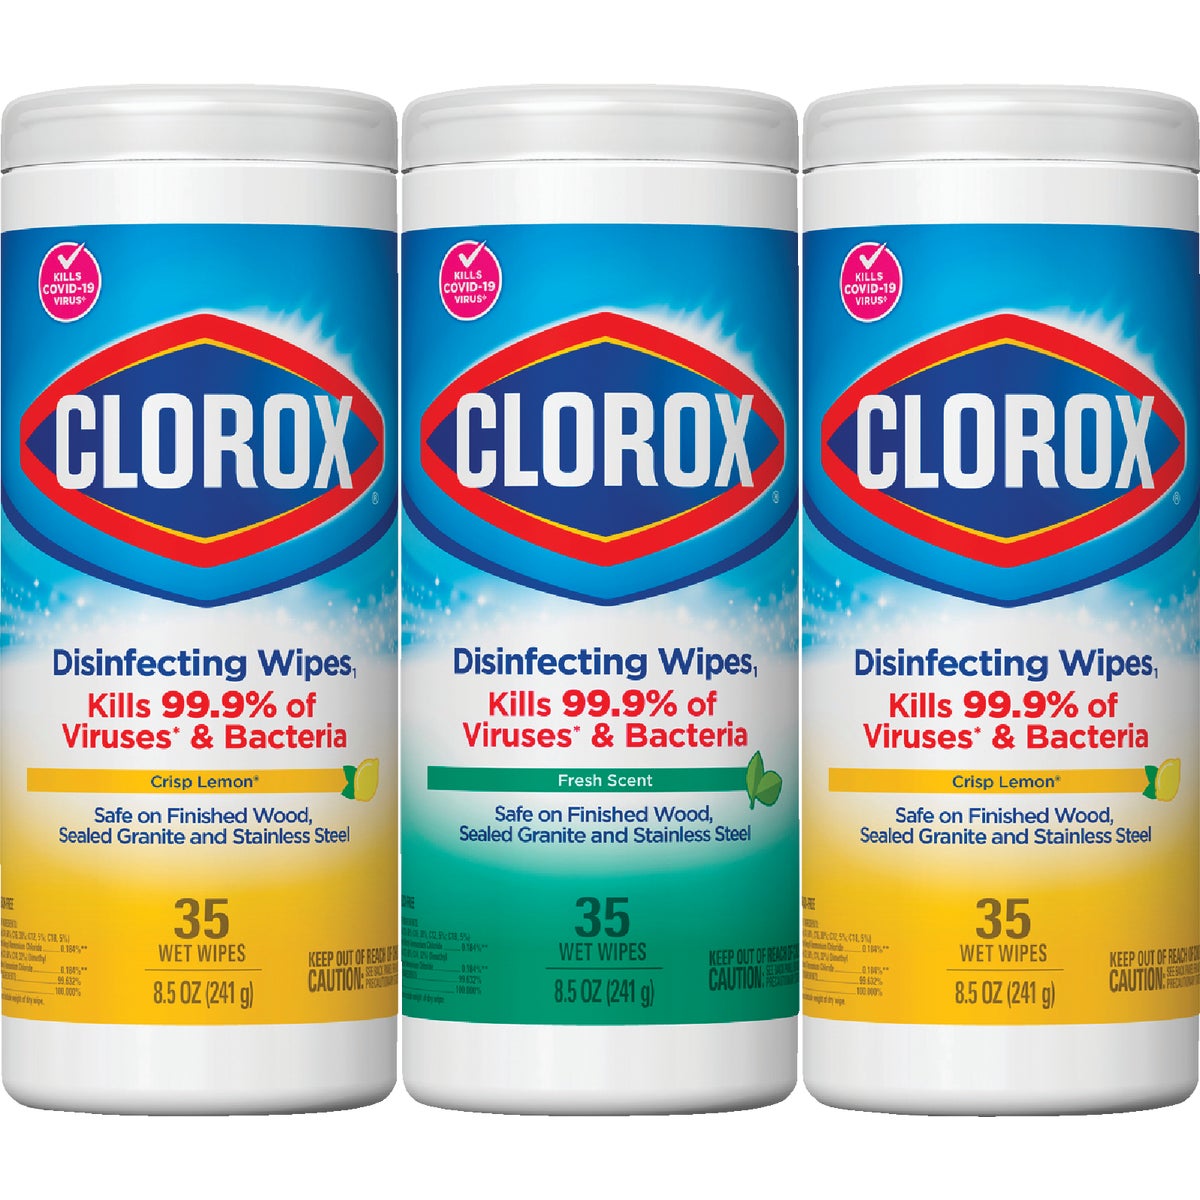 Clorox Disinfecting Cleaning Wipes Tub (3-Pack, 35 Each)